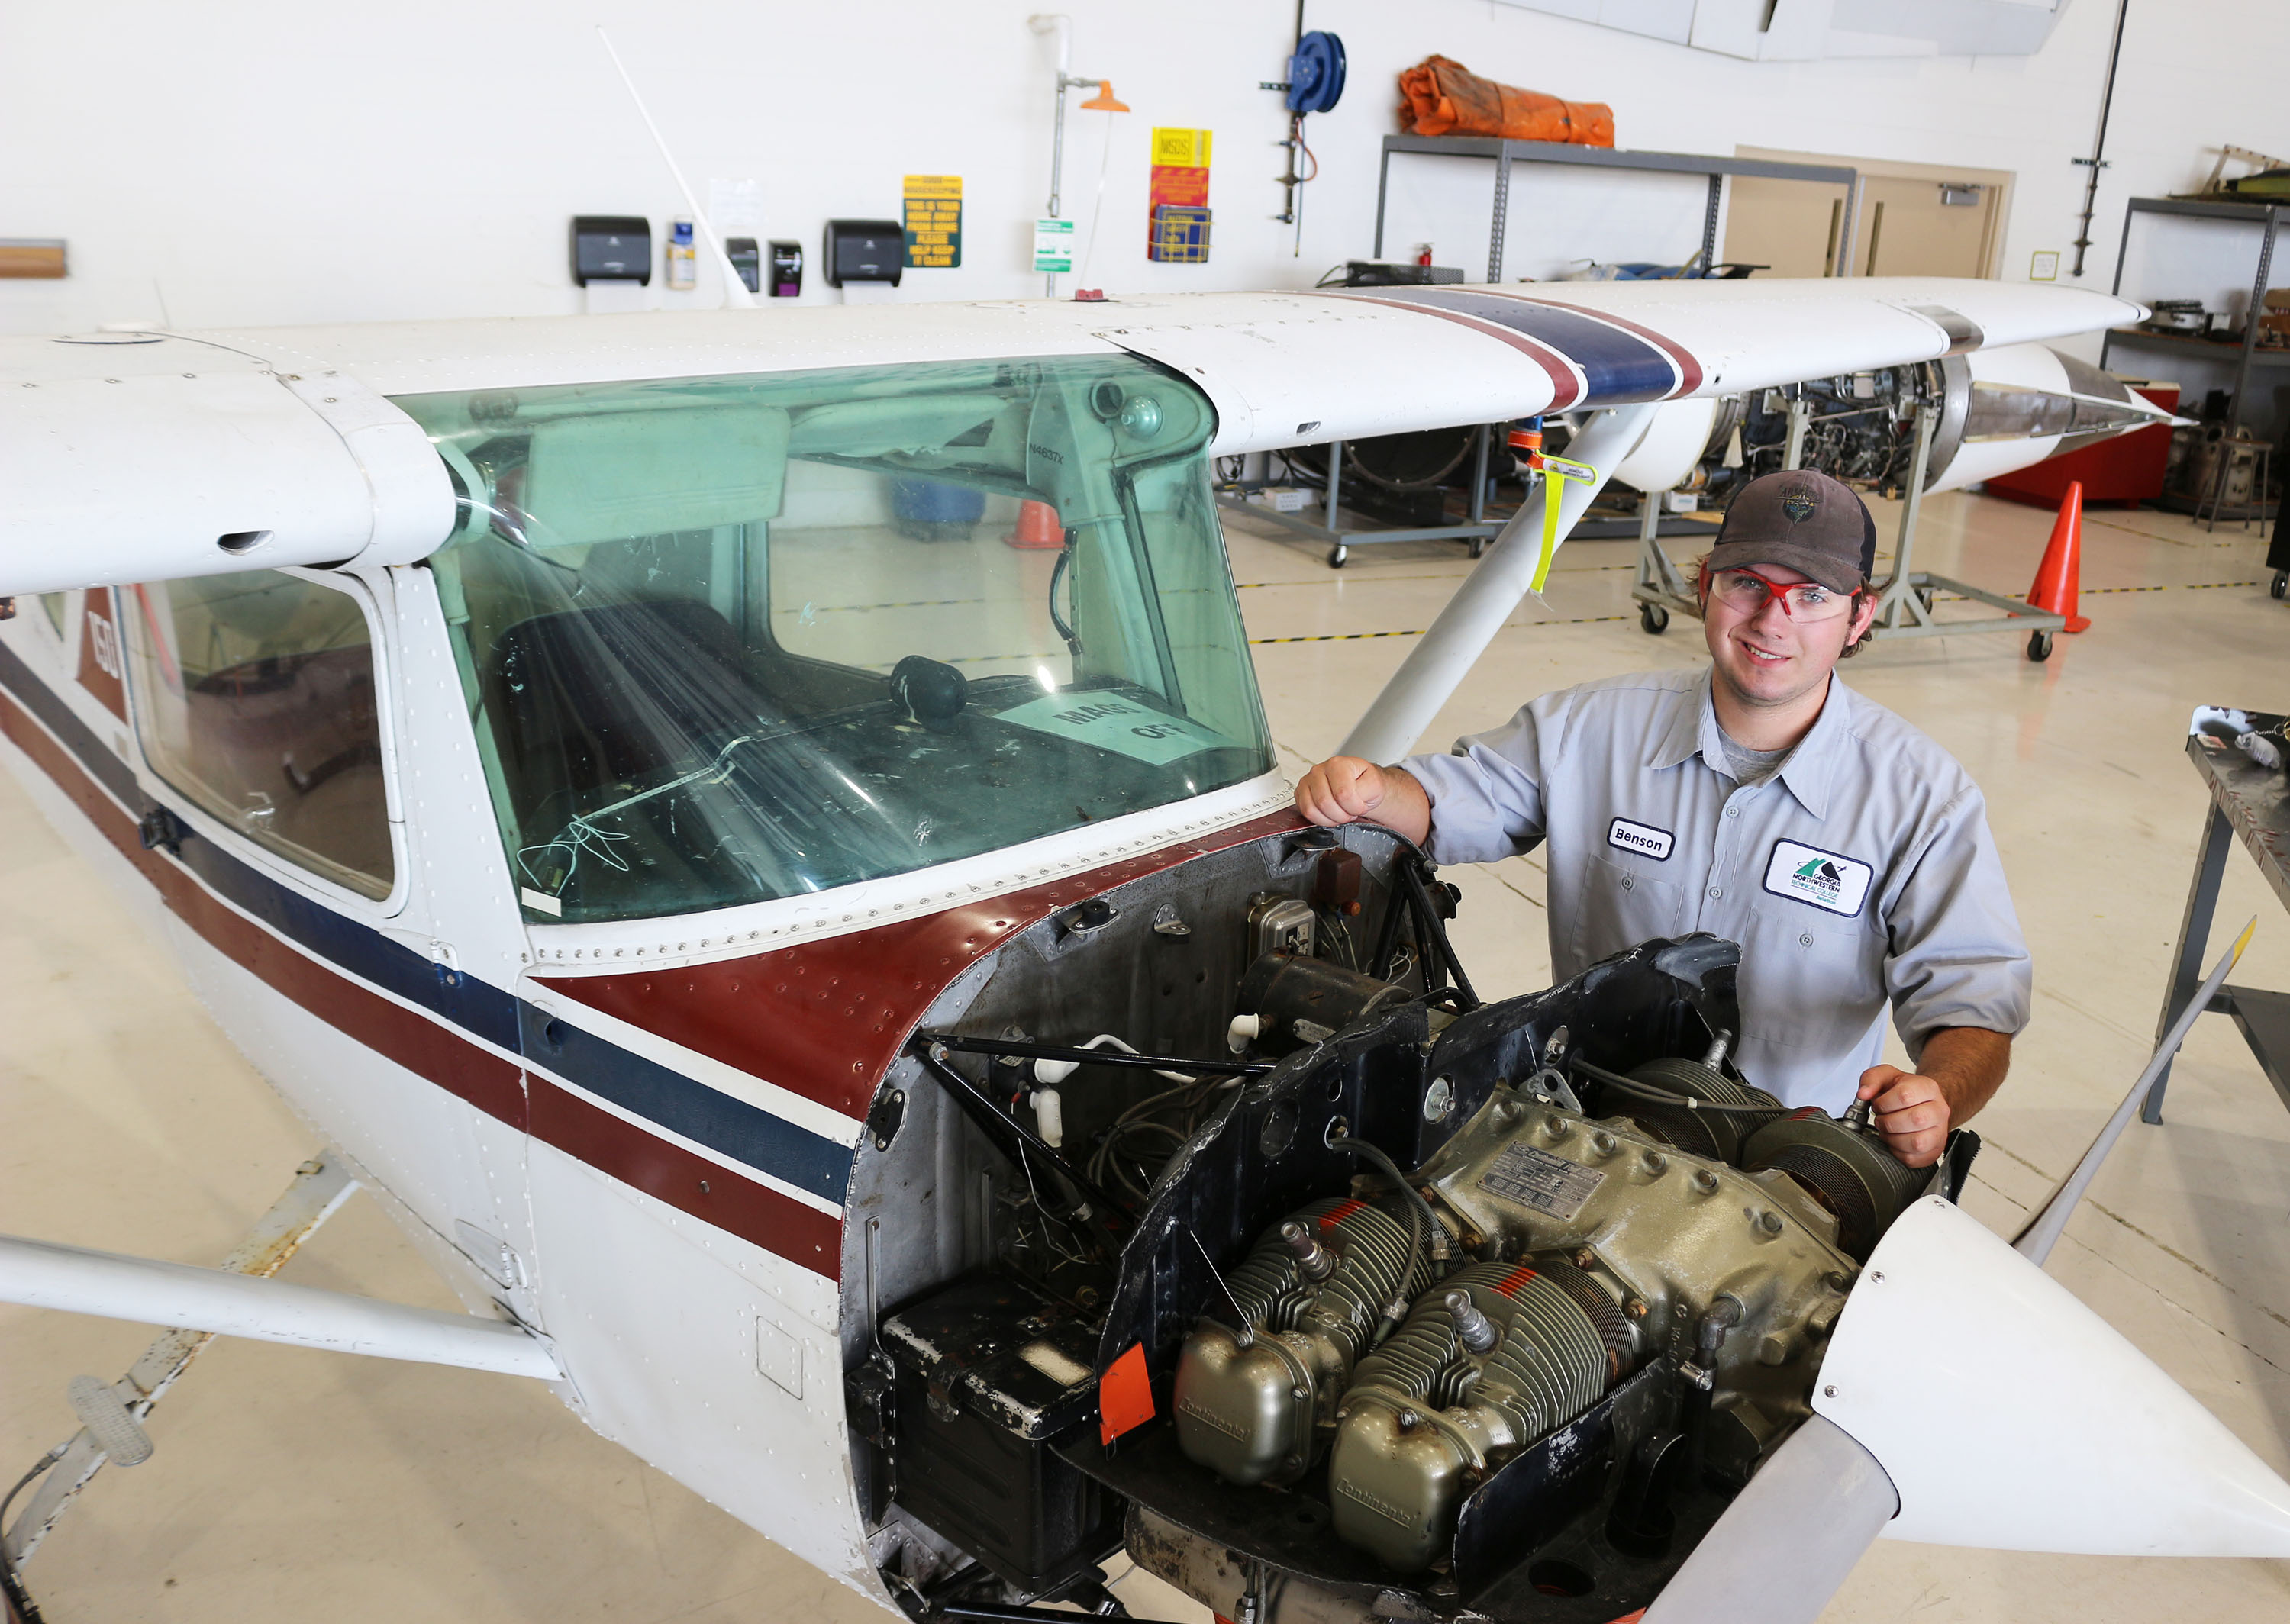 Benson Milam inspects the Cessna 150 at GNTC’s Aviation Training Center at the Richard B. Russell Regional Airport in Rome.